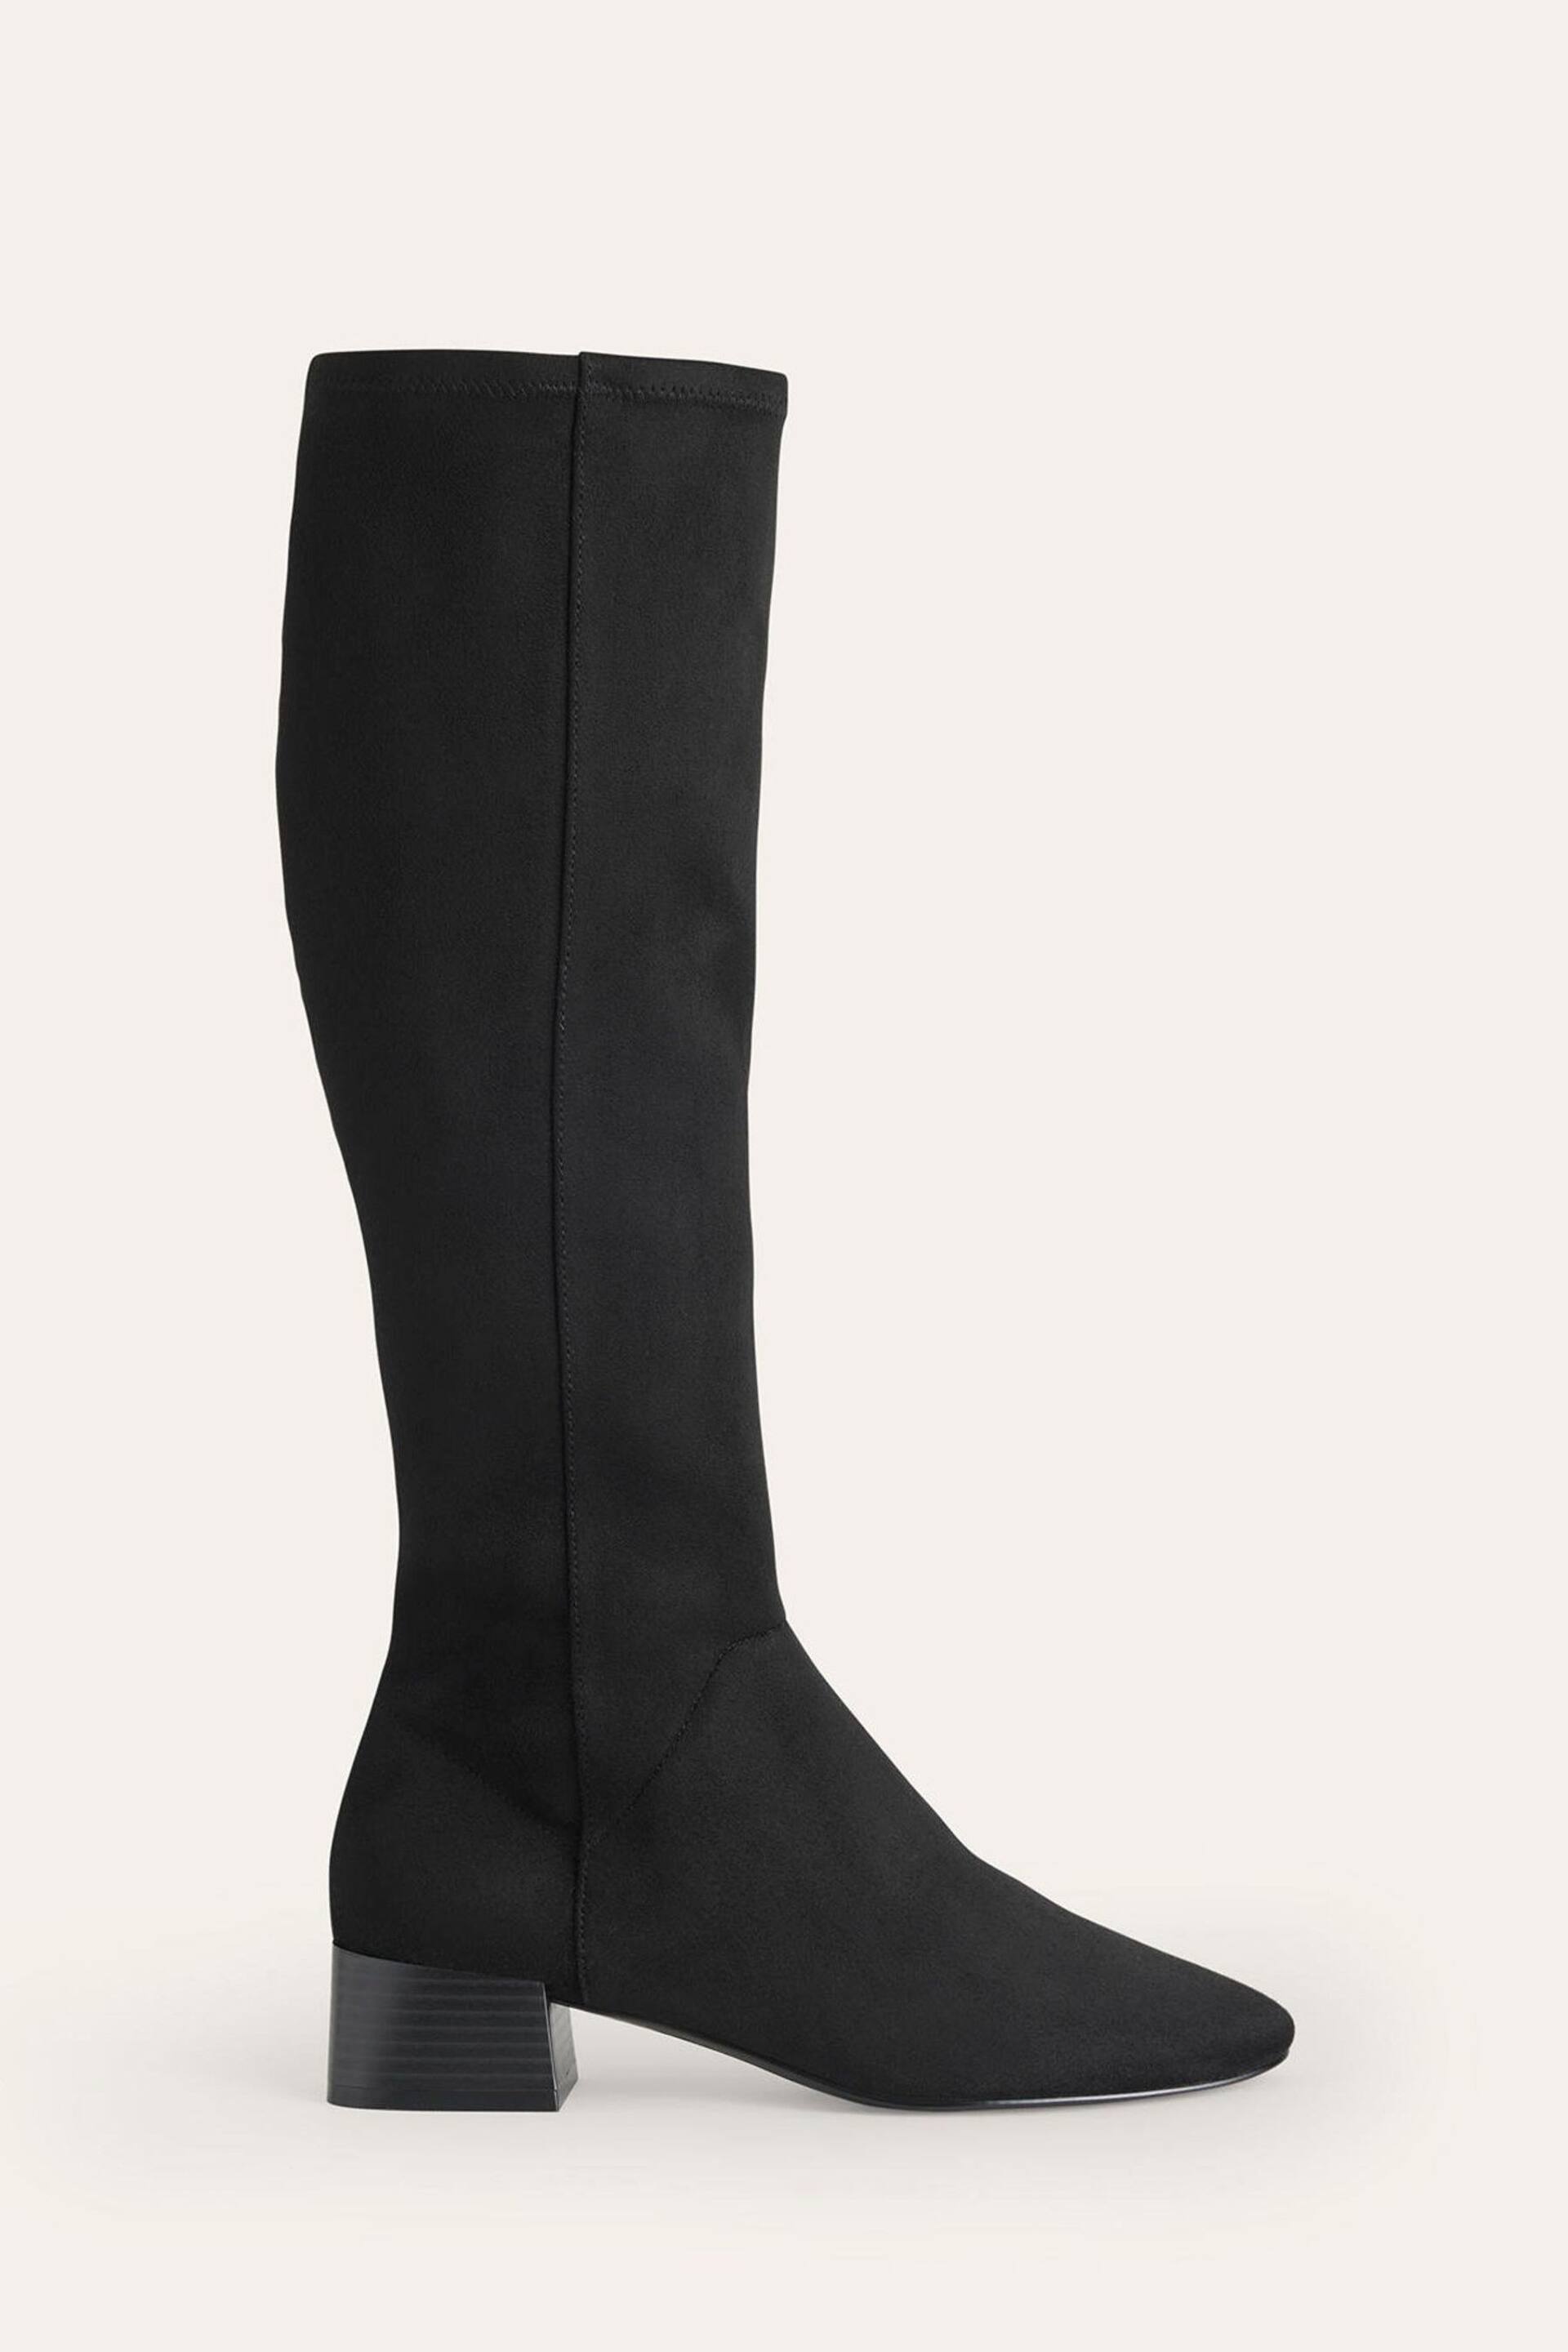 Boden Black Flat Stretch Knee High Boots - Image 1 of 4